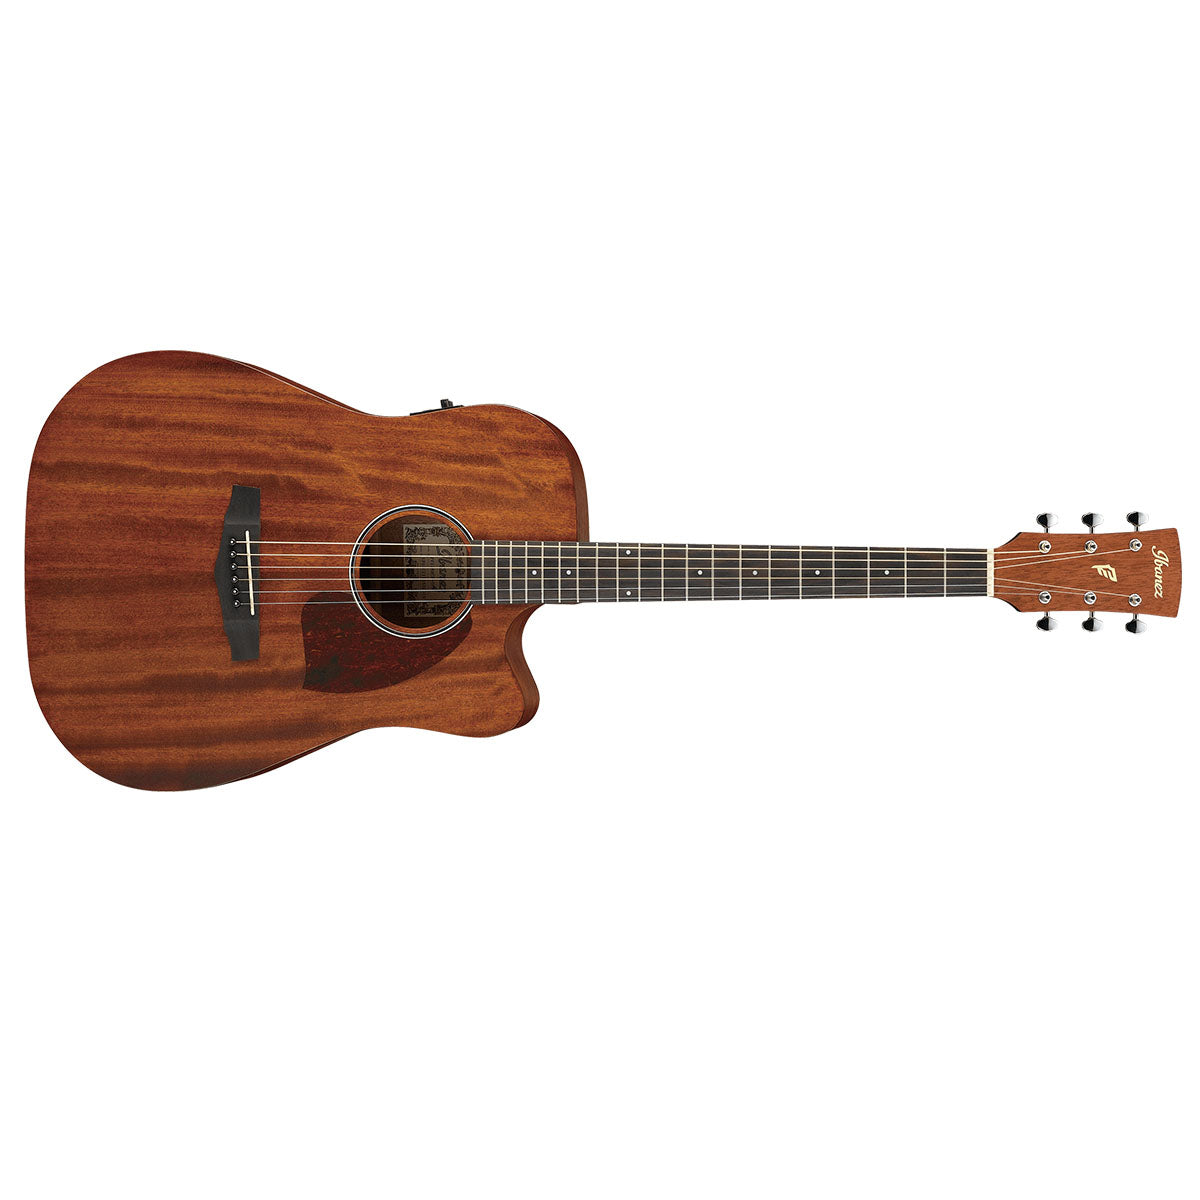 Ibanez PF12MHCE Acoustic Guitar Dreadnought Open Pore Natural w/ Pickup & Cutaway - PF12MHCEOPN